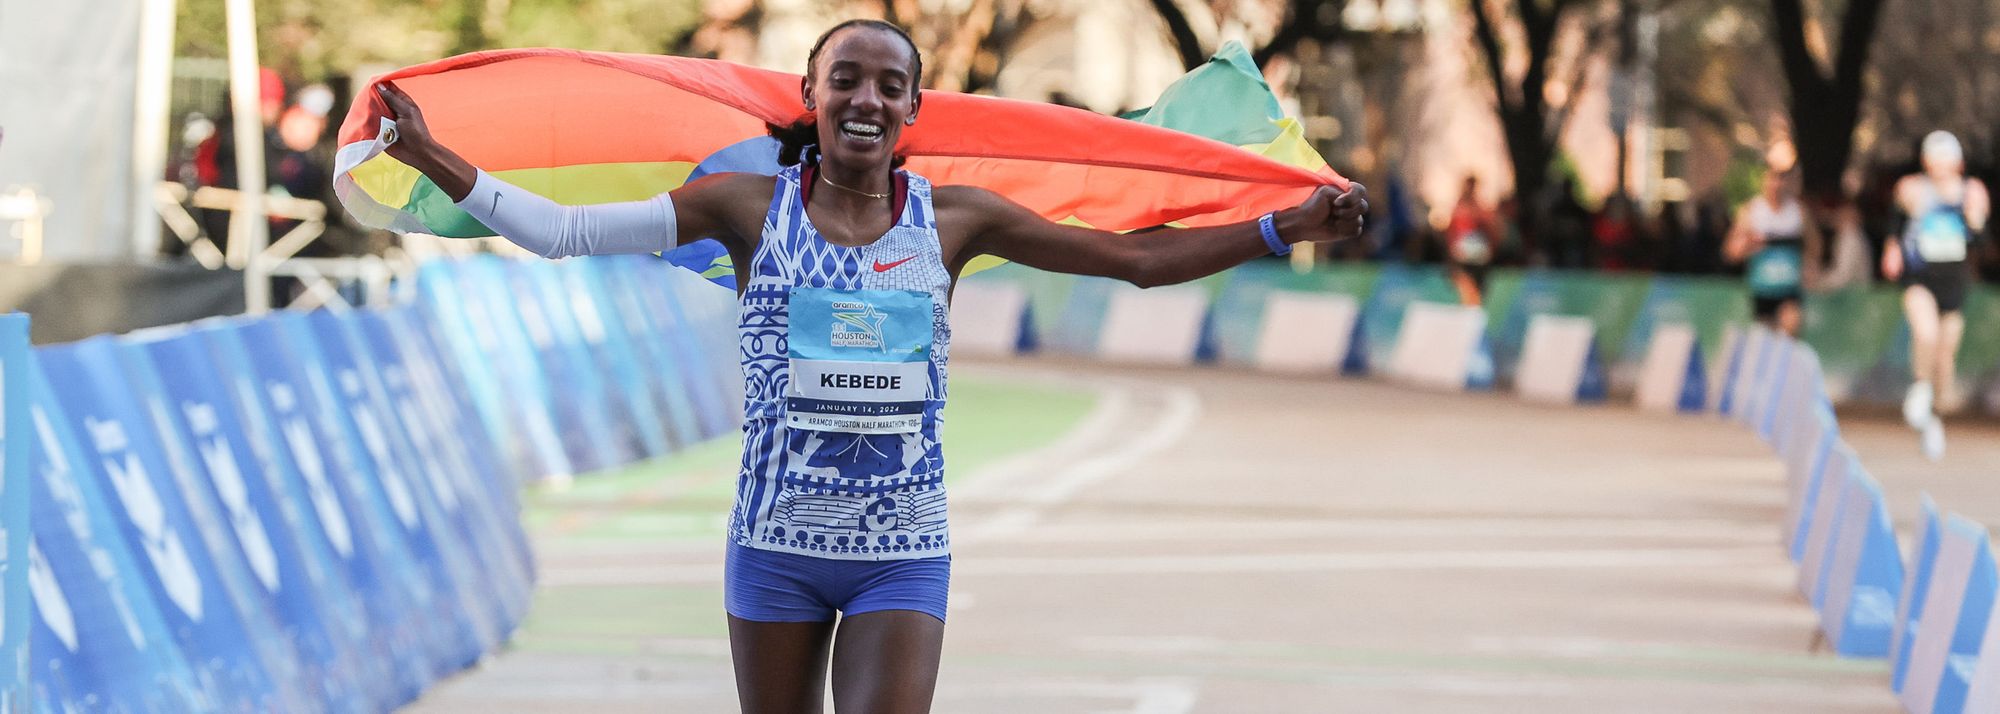 Ethiopia’s Sutume Asefa Kebede set a North American all-comers’ record of 1:04:37 to win the Aramco Houston Half Marathon, a World Athletics Gold Label road race, on Sunday